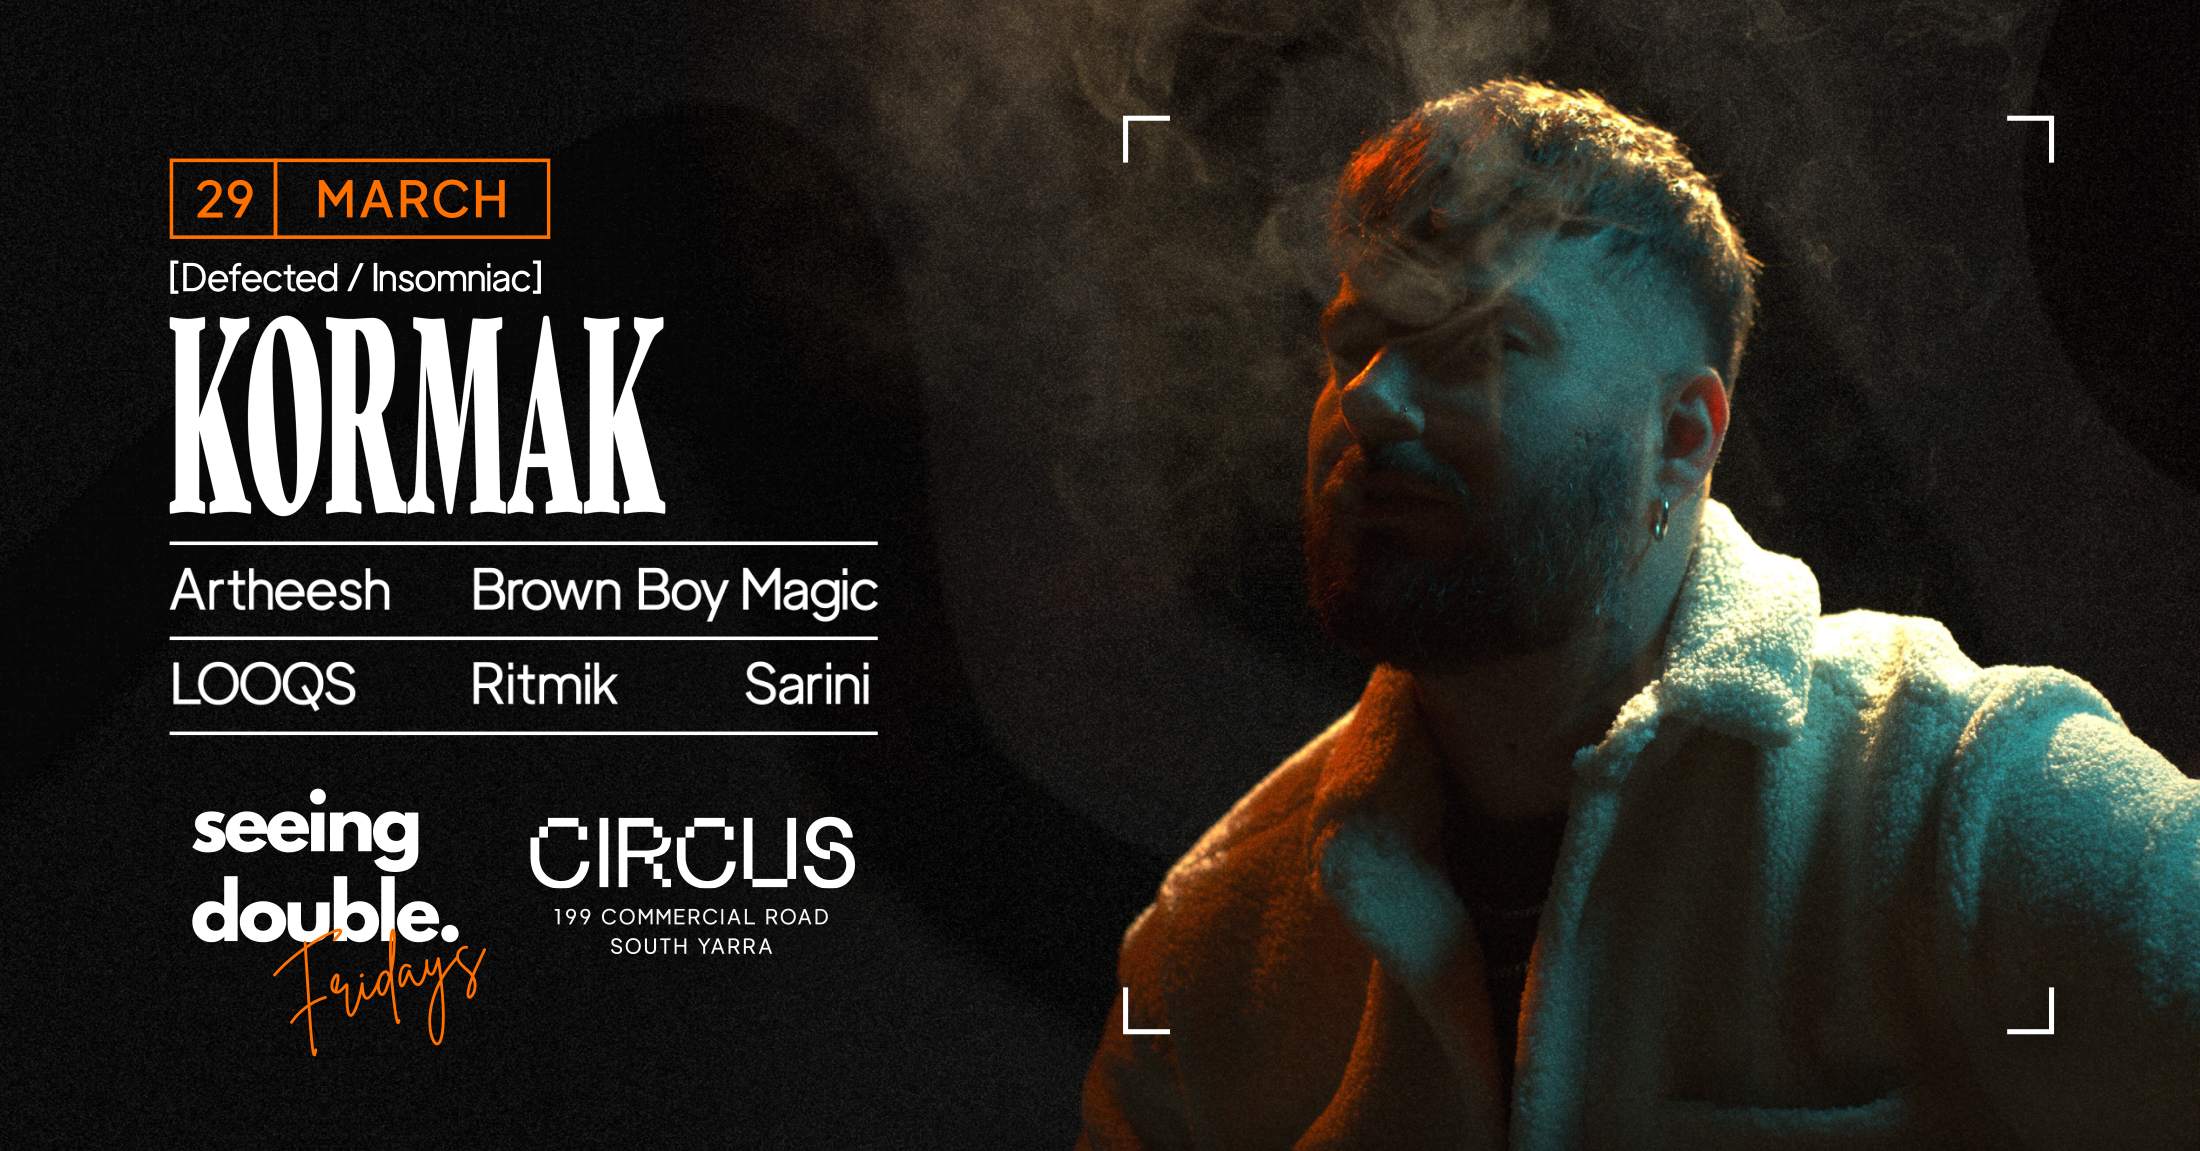 KORMAK (DFTD/Insomniac) at Circus - Seeing Double Fridays - Página frontal